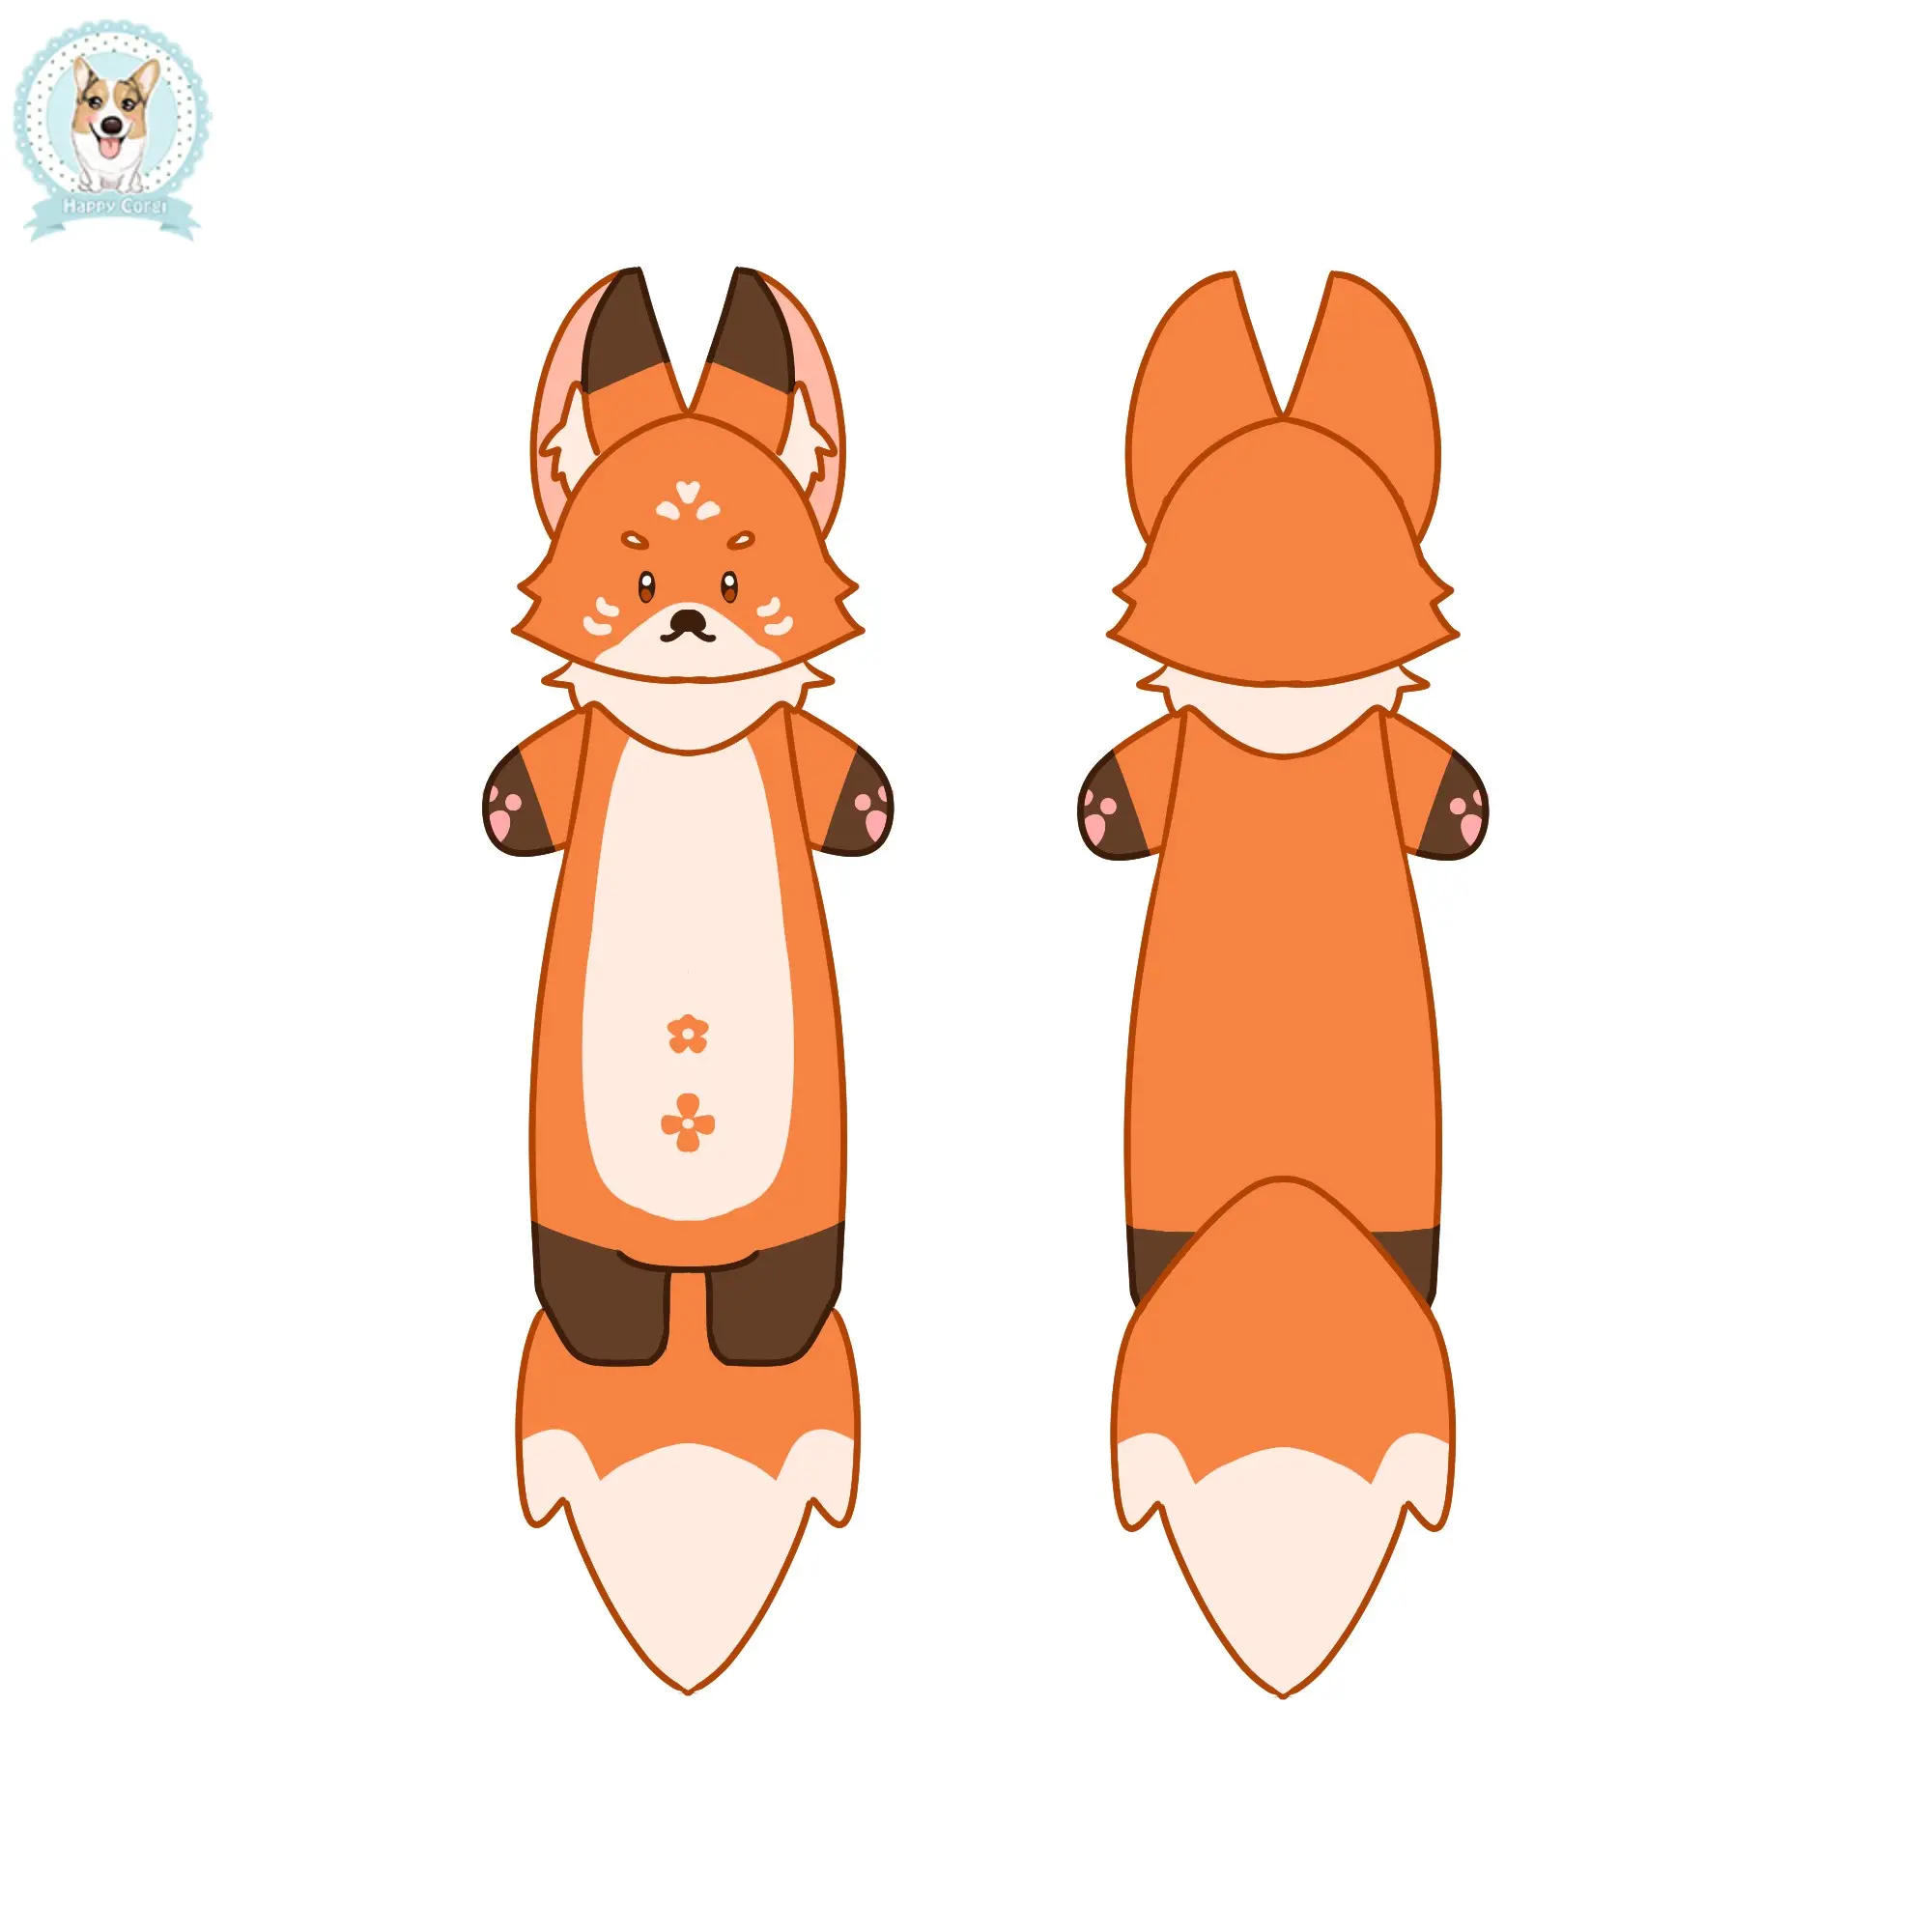 Cuboid shape of cute fox-shaped stuffed animal A stuffed animal that can be used as a throw pillow